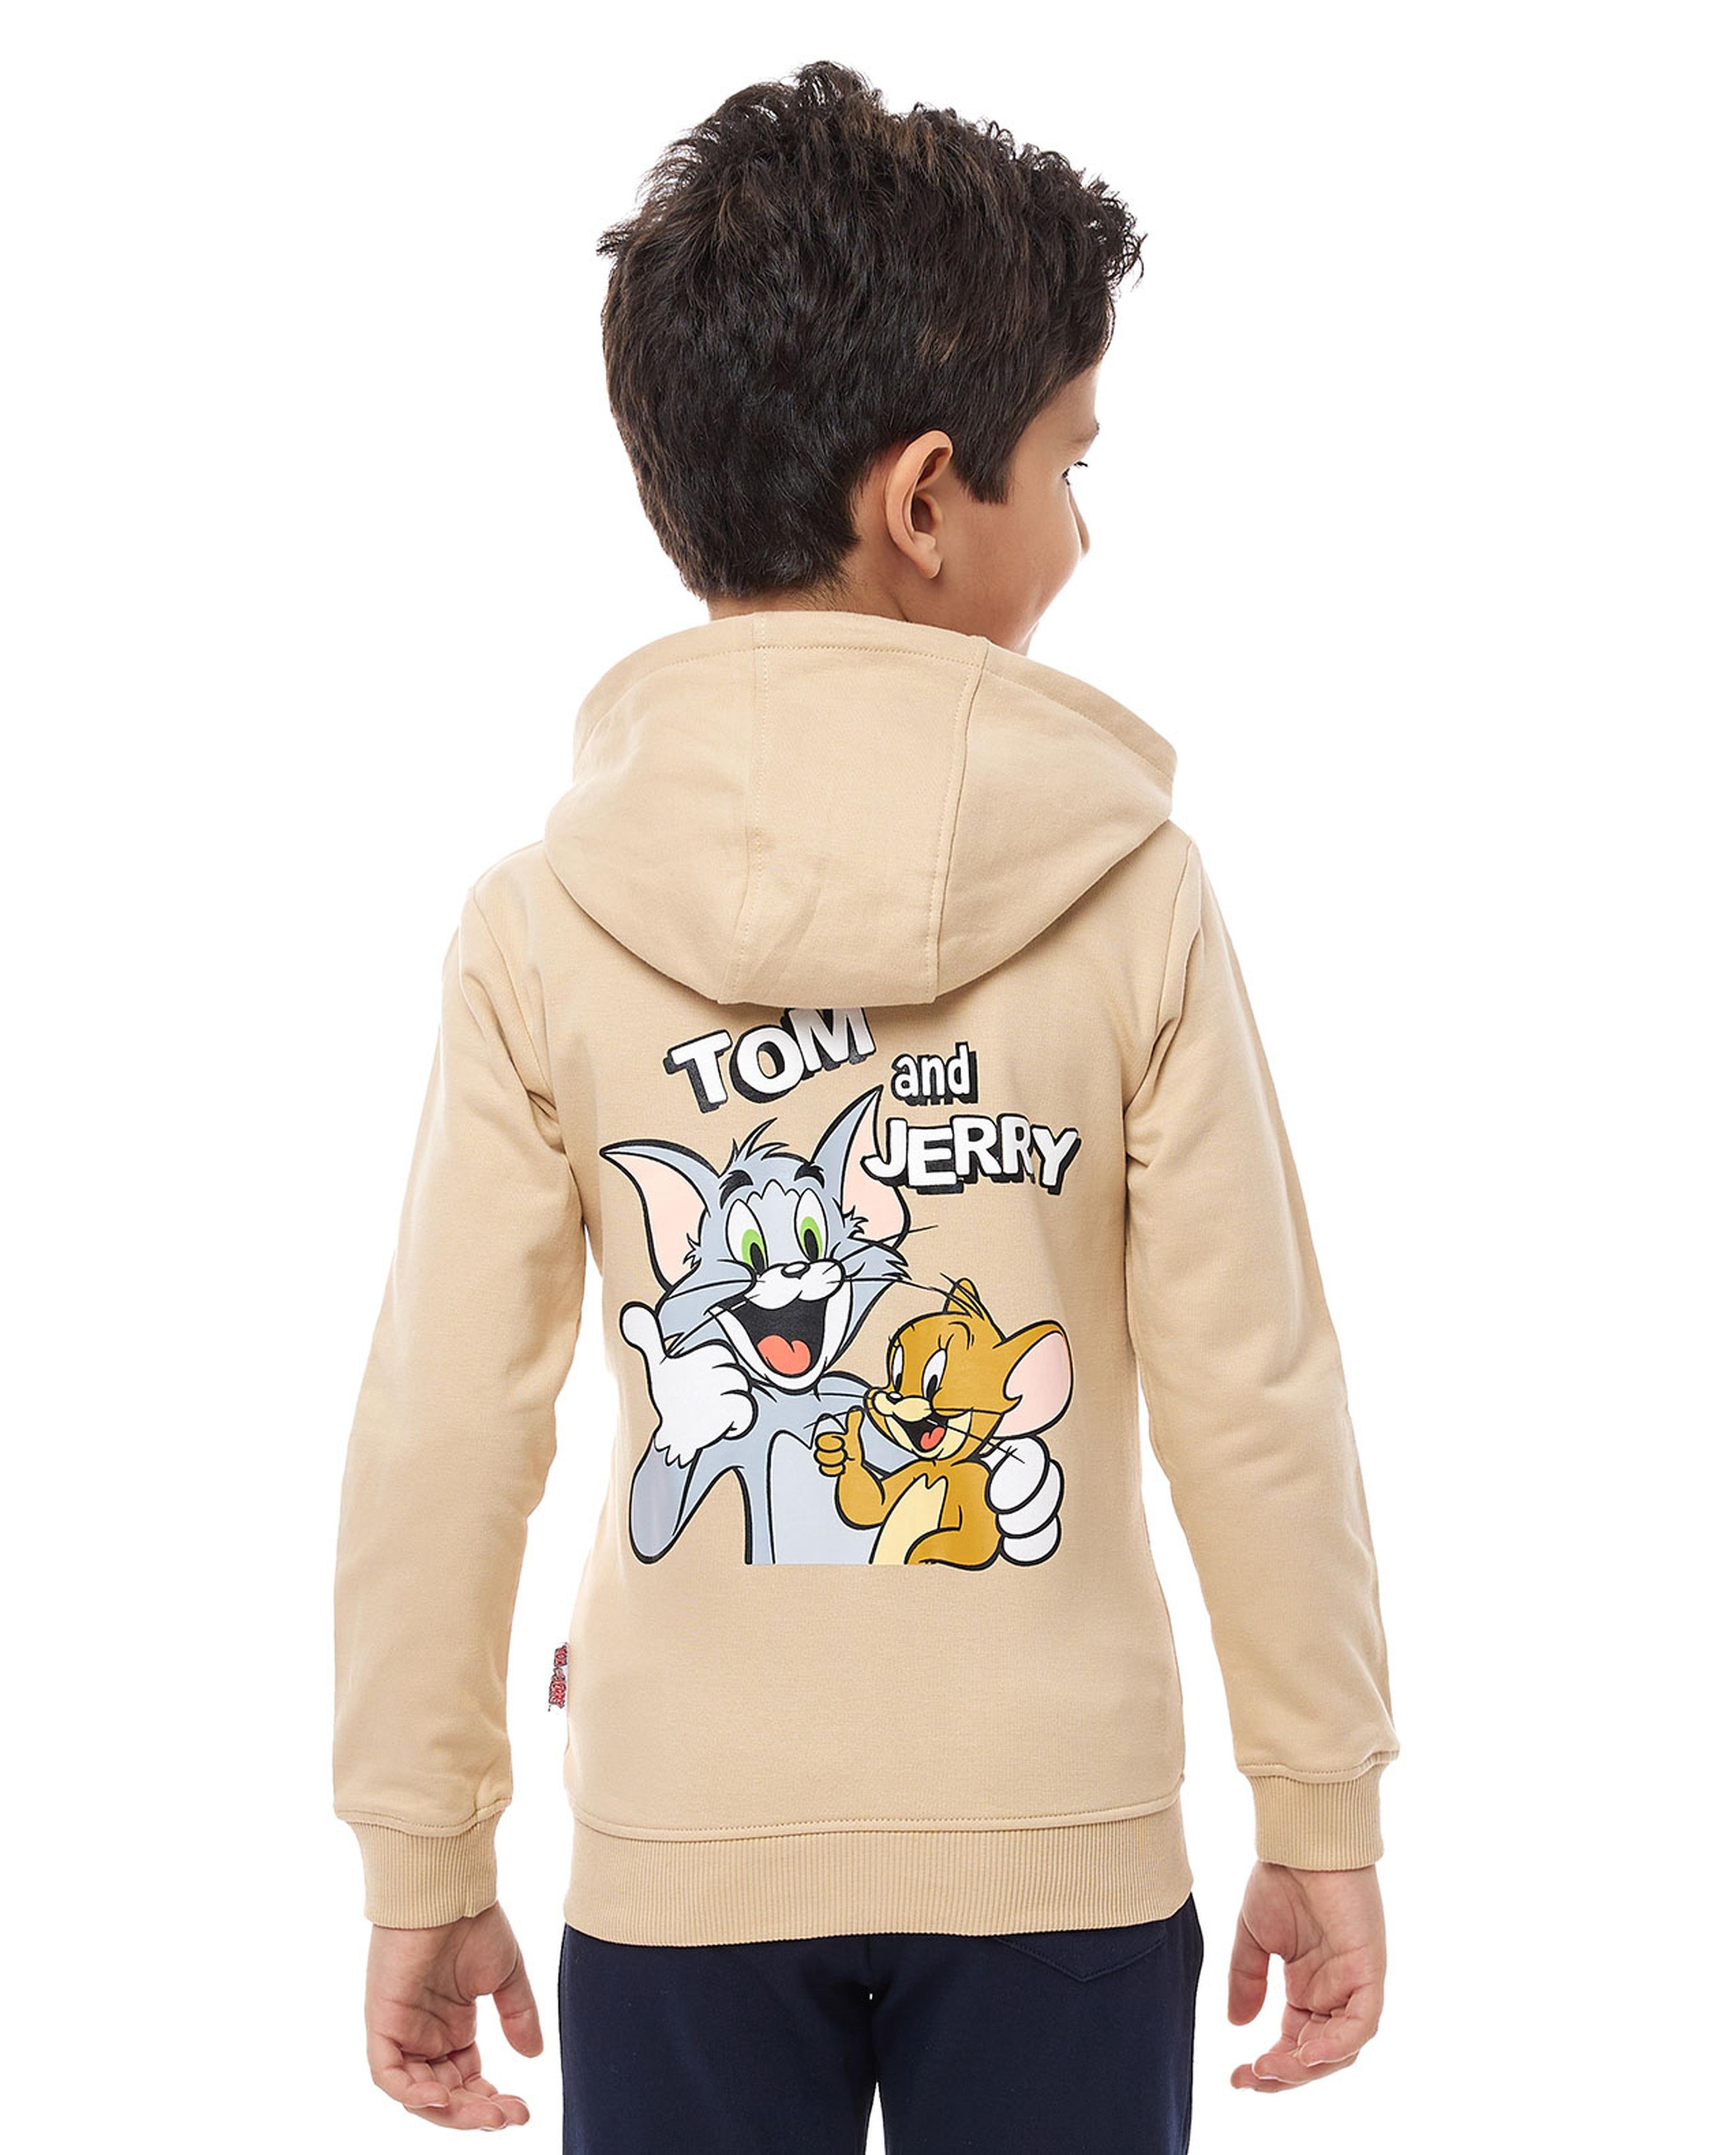 Tom & Jerry Print Hooded Jacket with Zipper Closure